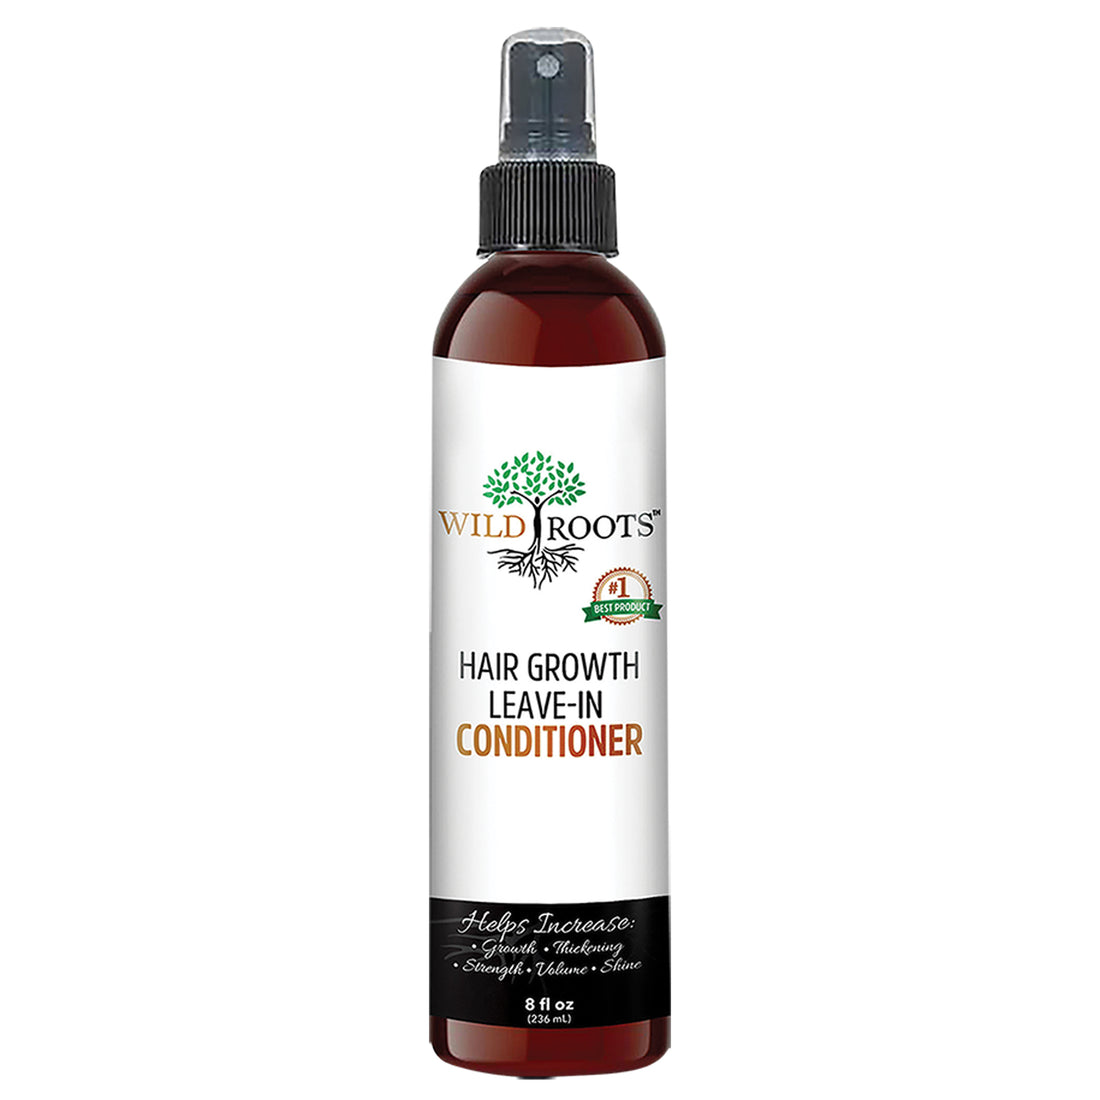 Wildroots Hair Growth Leave-in Conditioner (8 Fl oz)